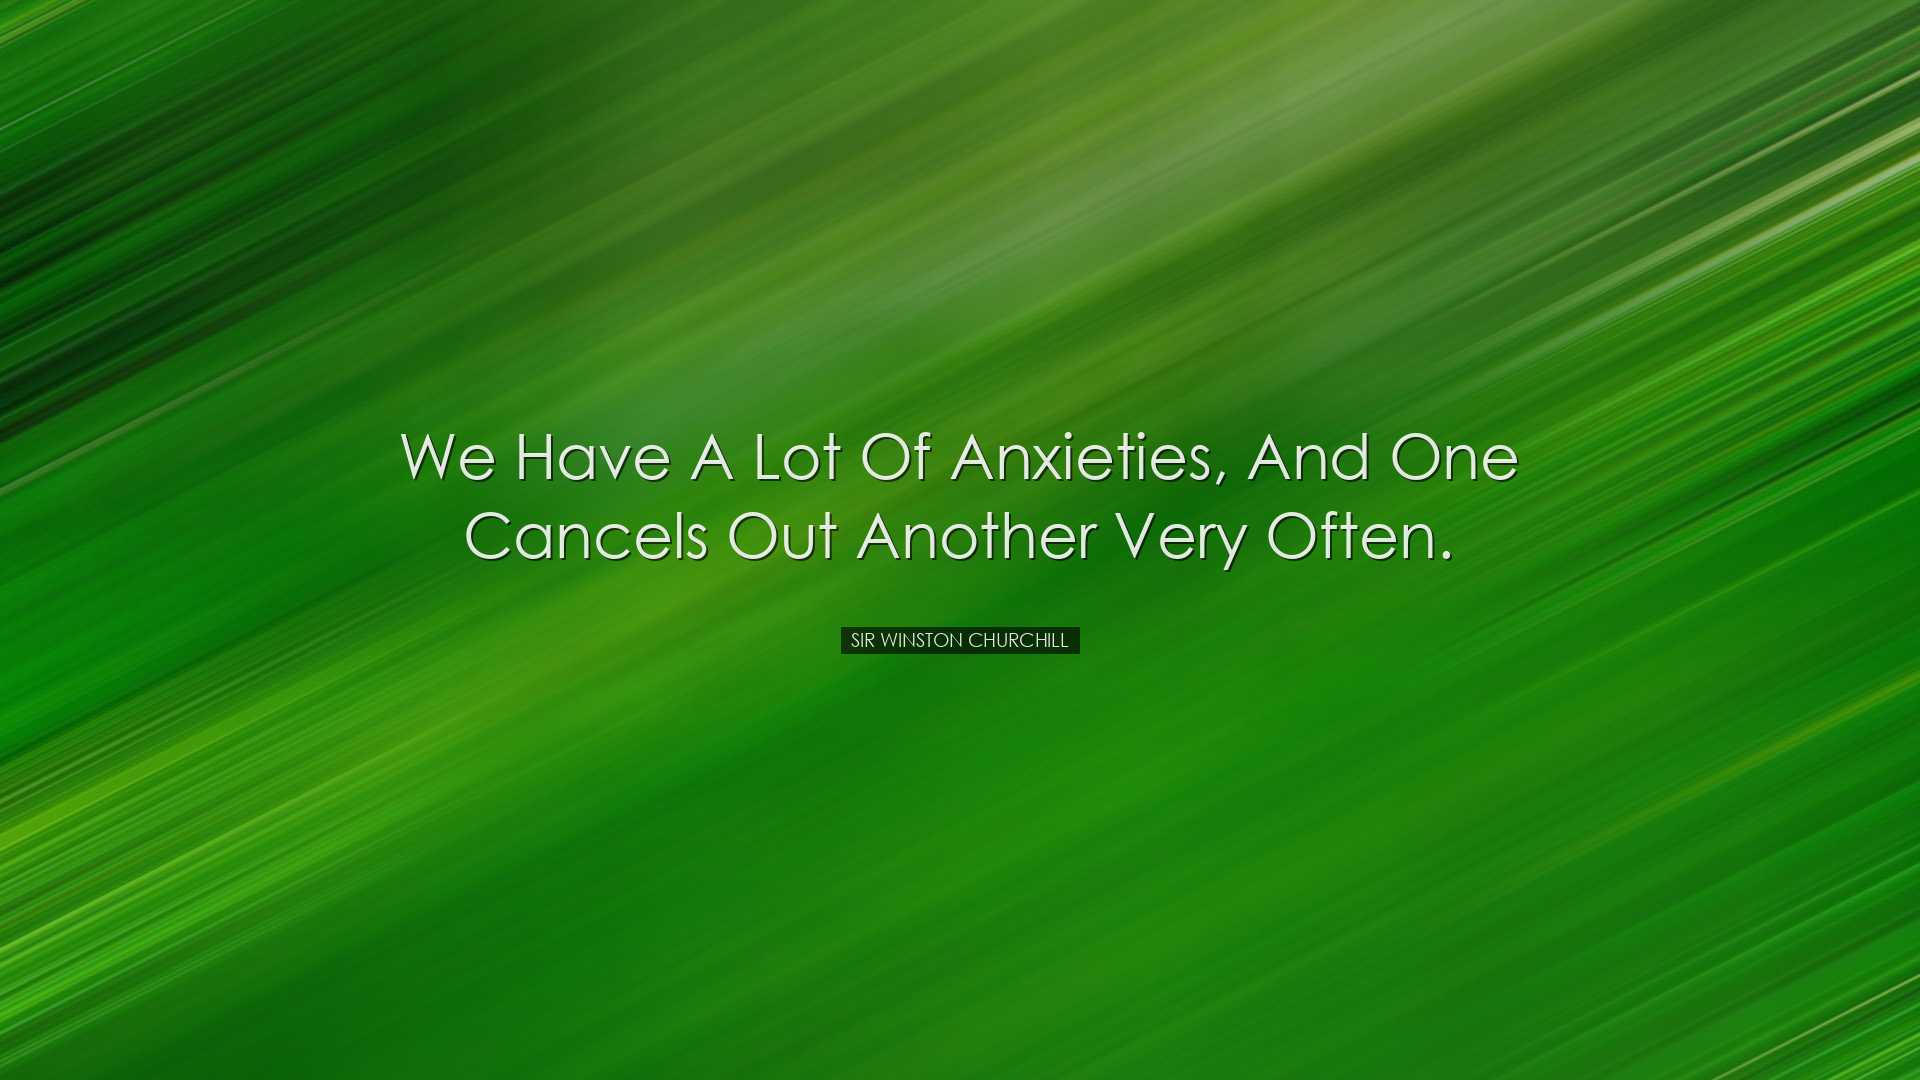 We have a lot of anxieties, and one cancels out another very often